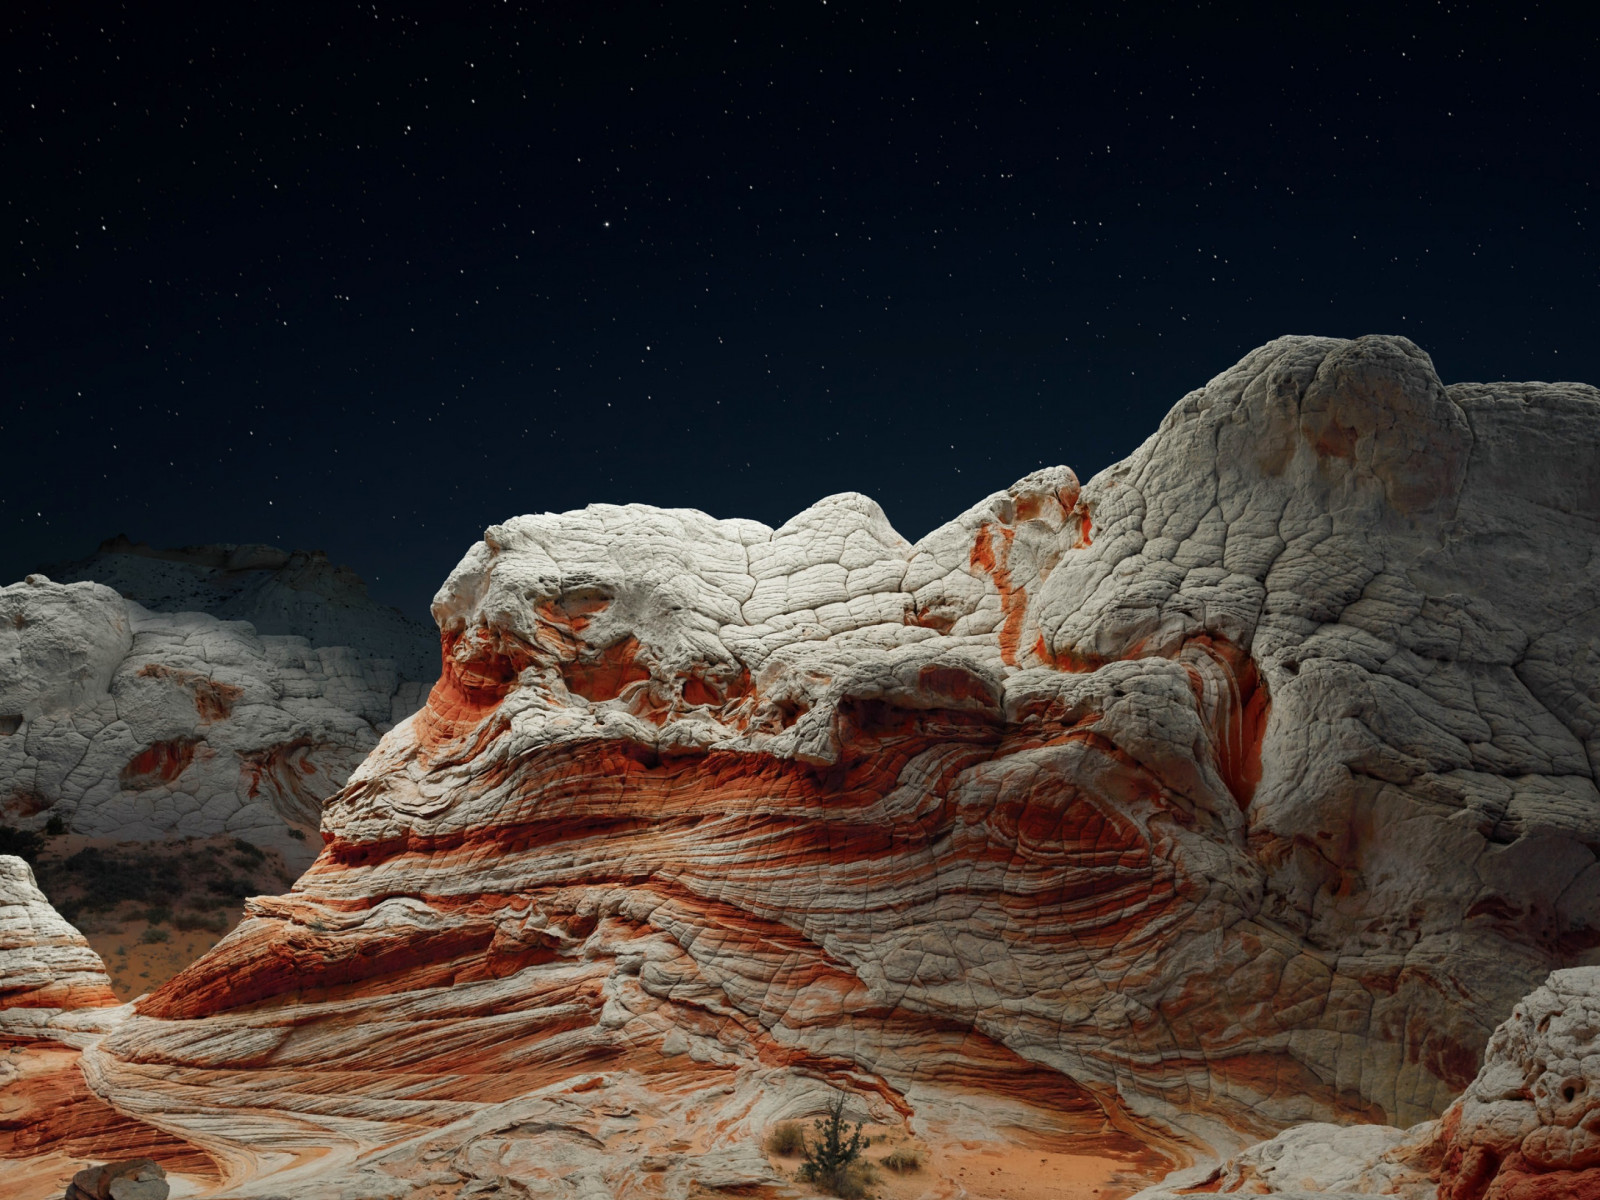 The night sky and desert valley wallpaper 1600x1200